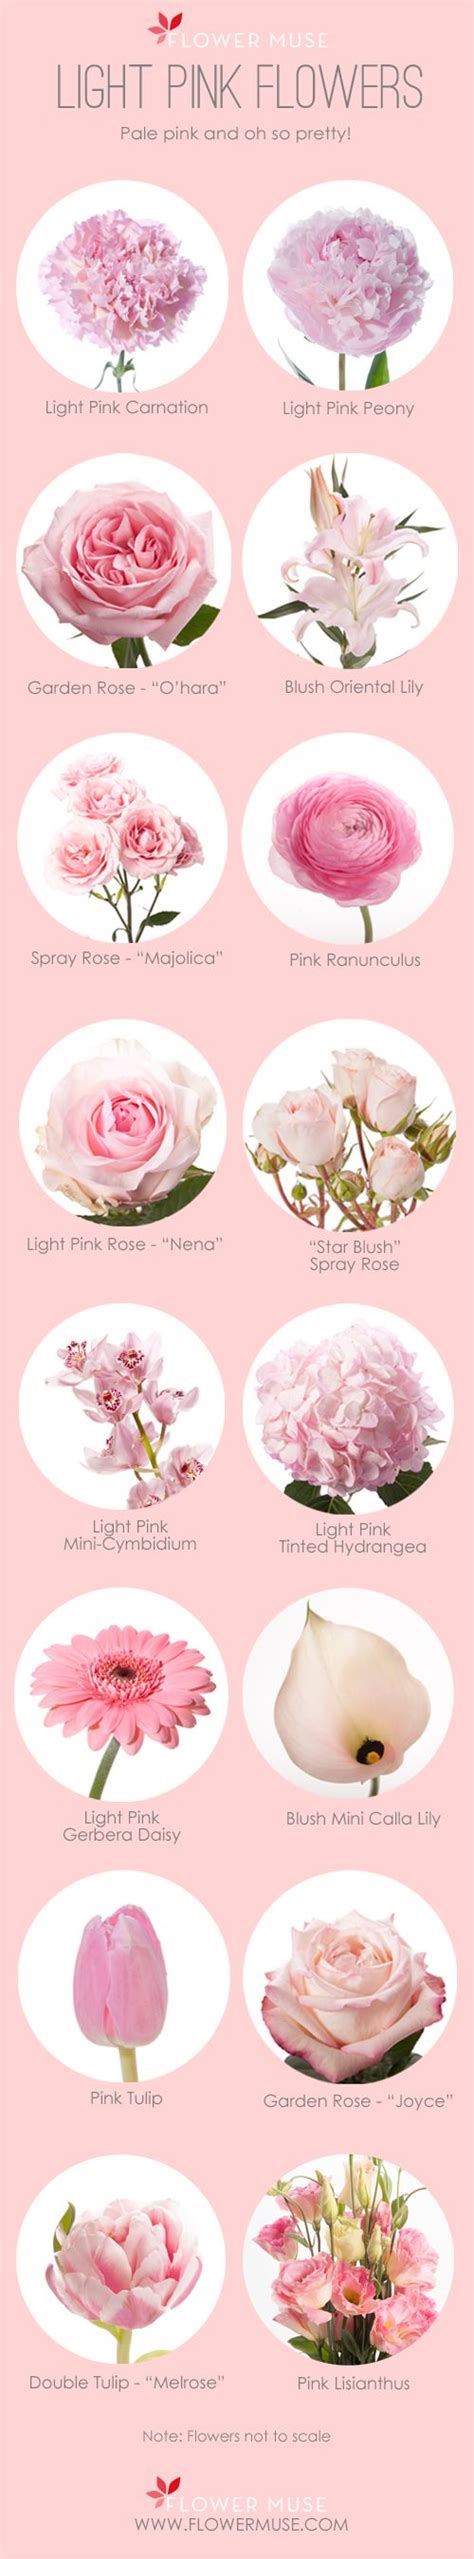 Names Of Light Pink Flowers